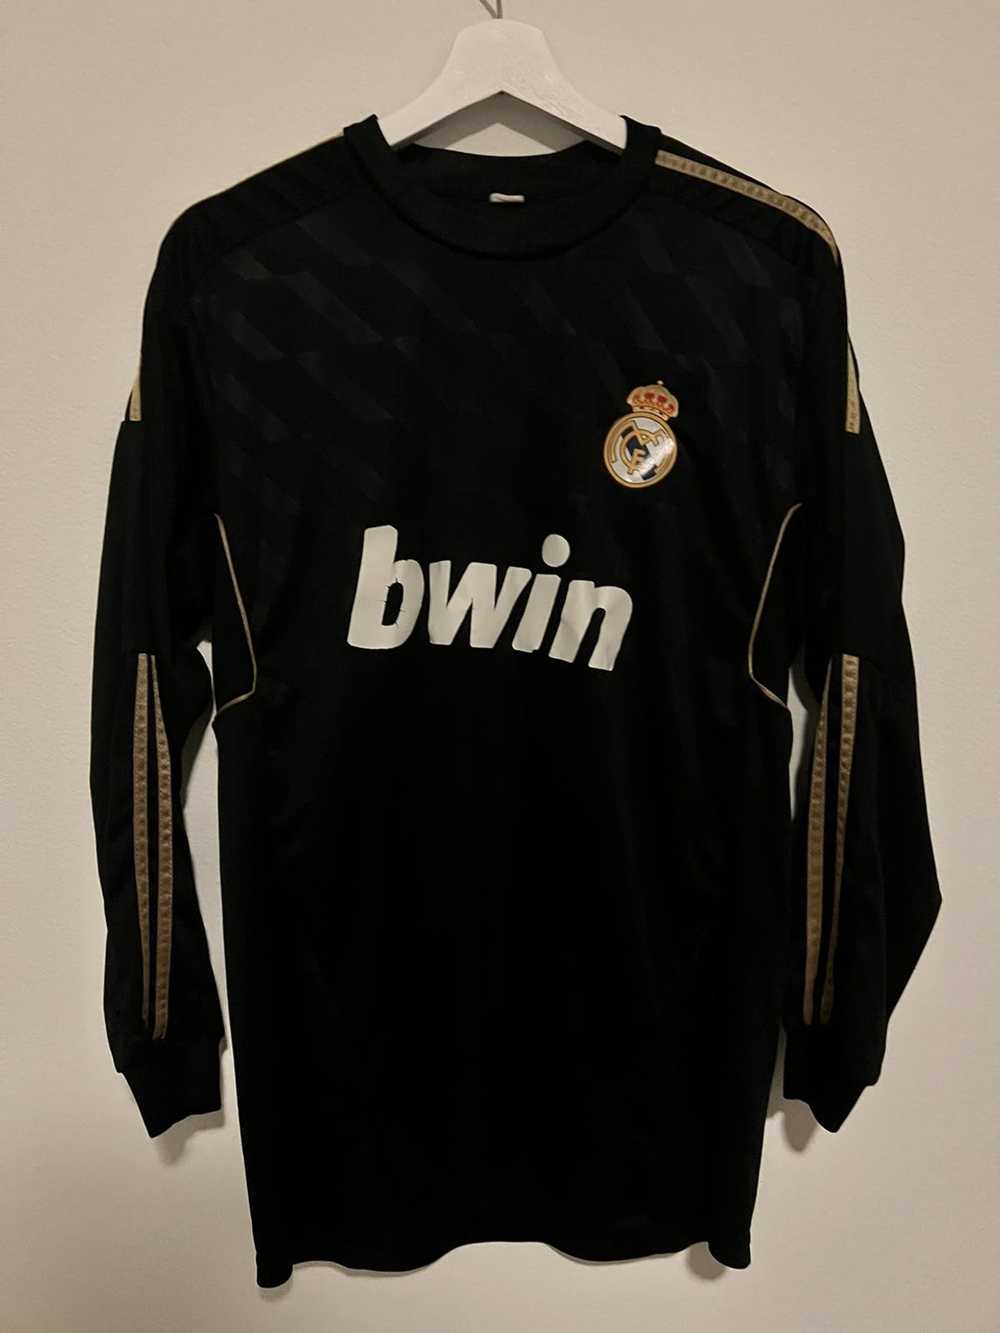 Real Madrid Real Madrid long sleeve jersey - image 1